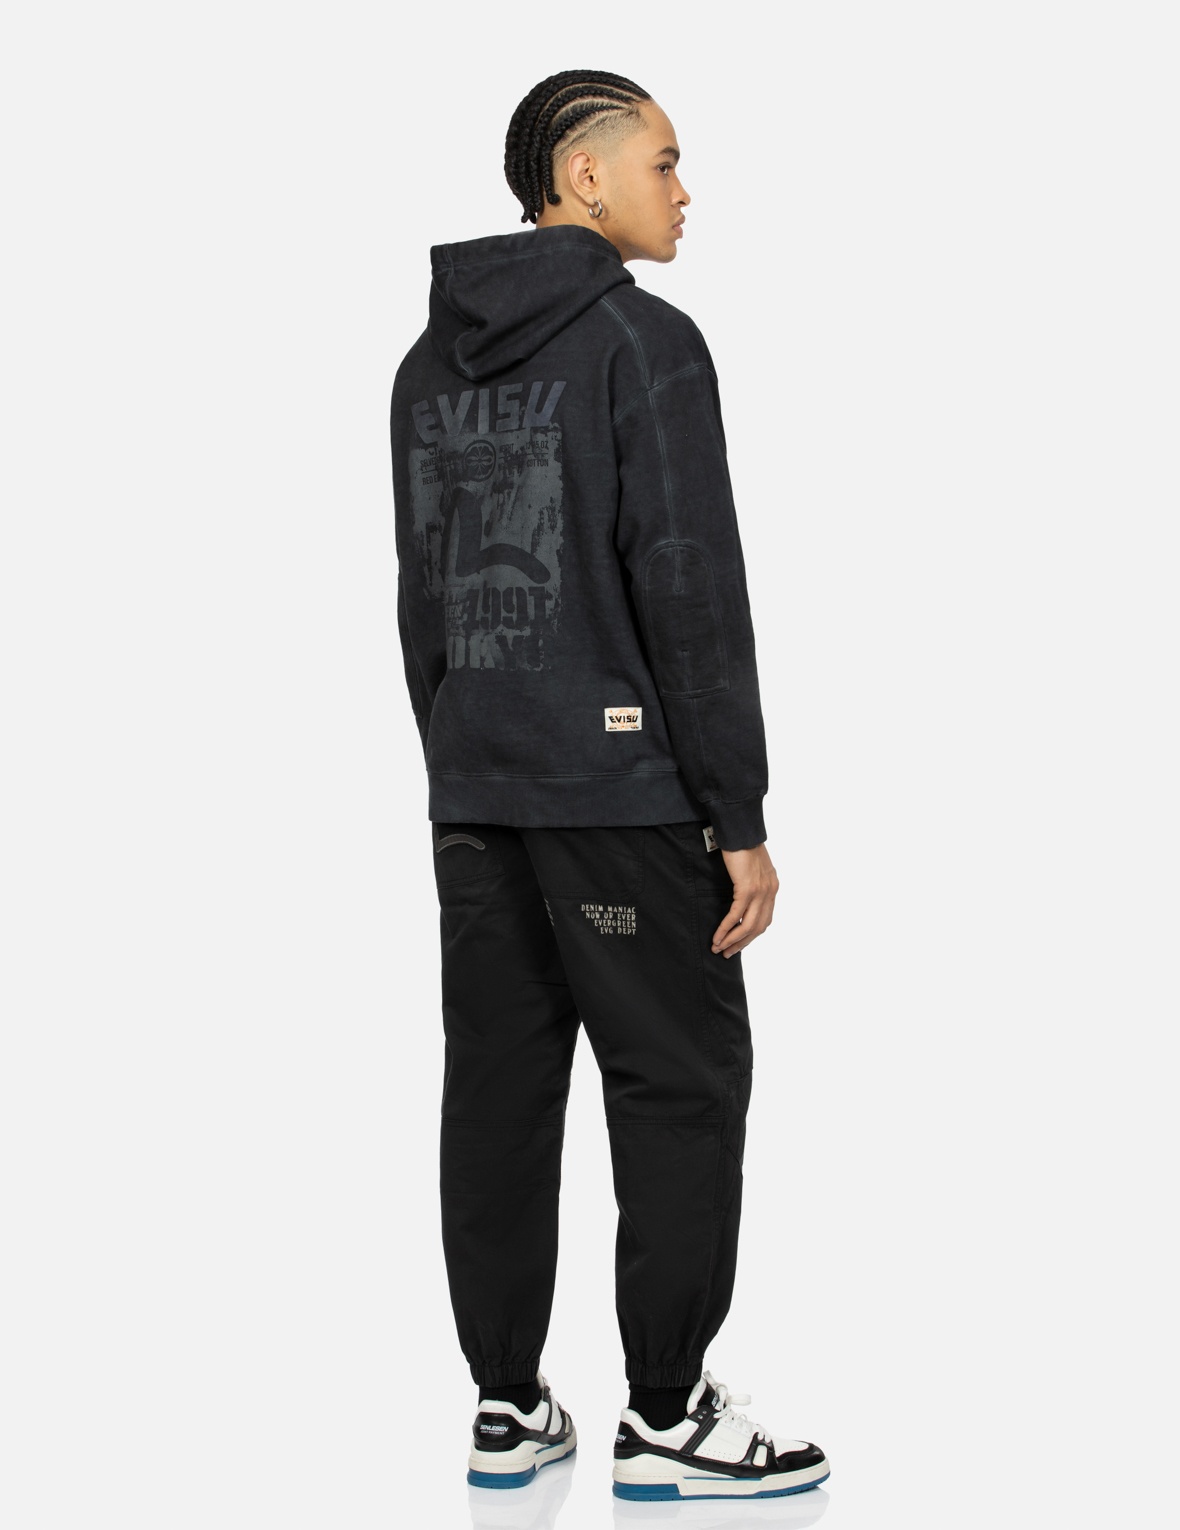 SEAGULL AND LOGO PRINT RELAX FIT HOODIE - 3